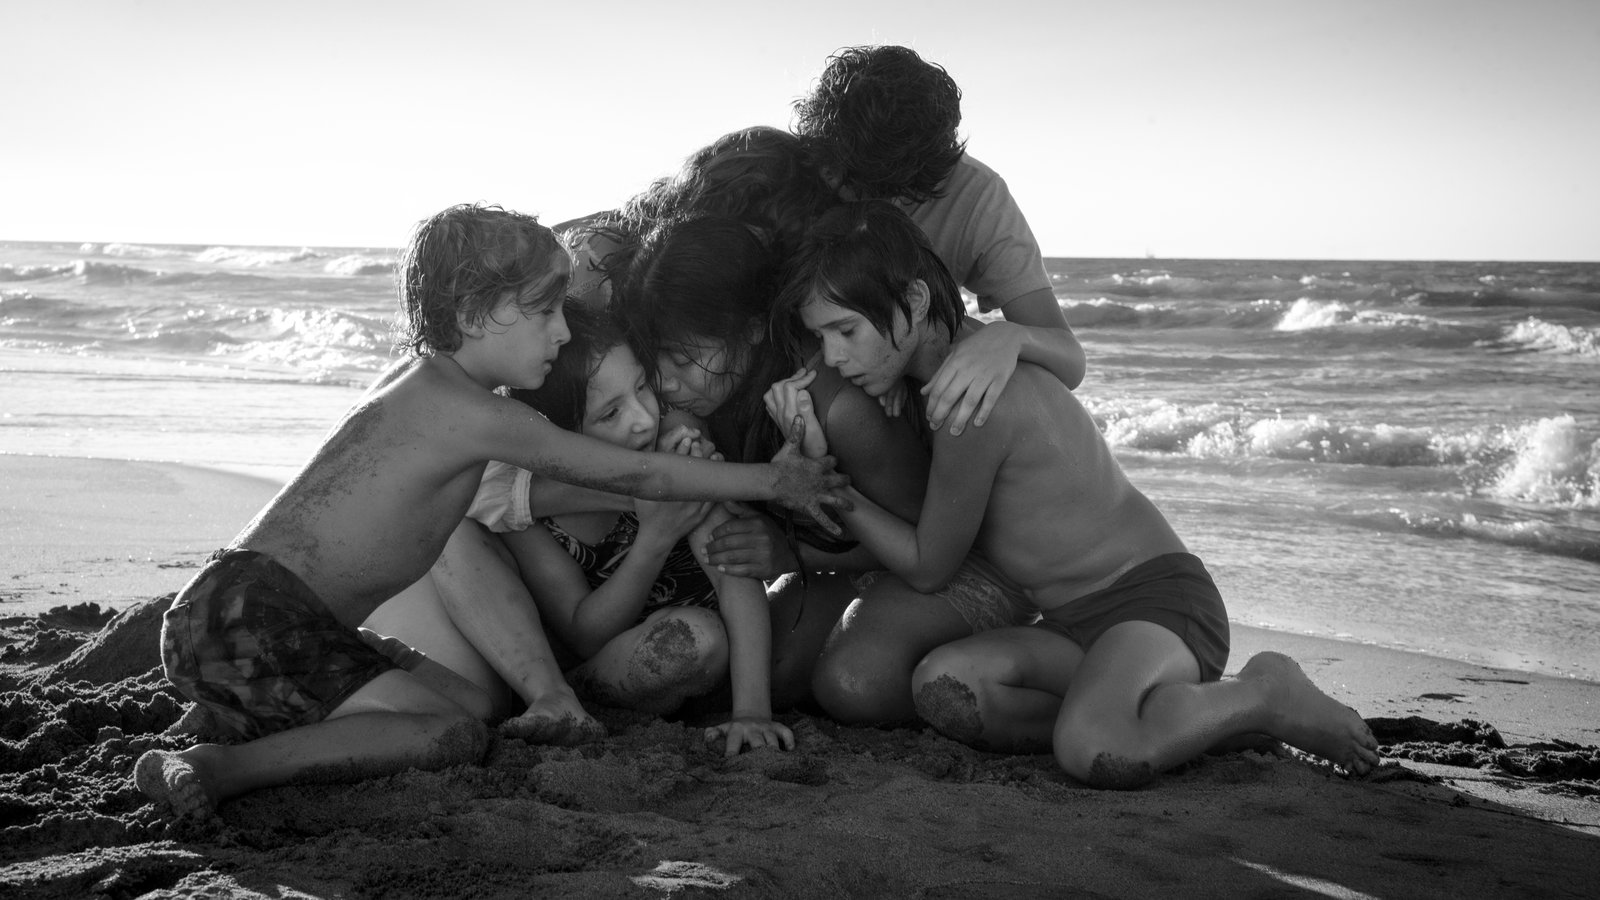 A still from Roma of a family hugging on the beach